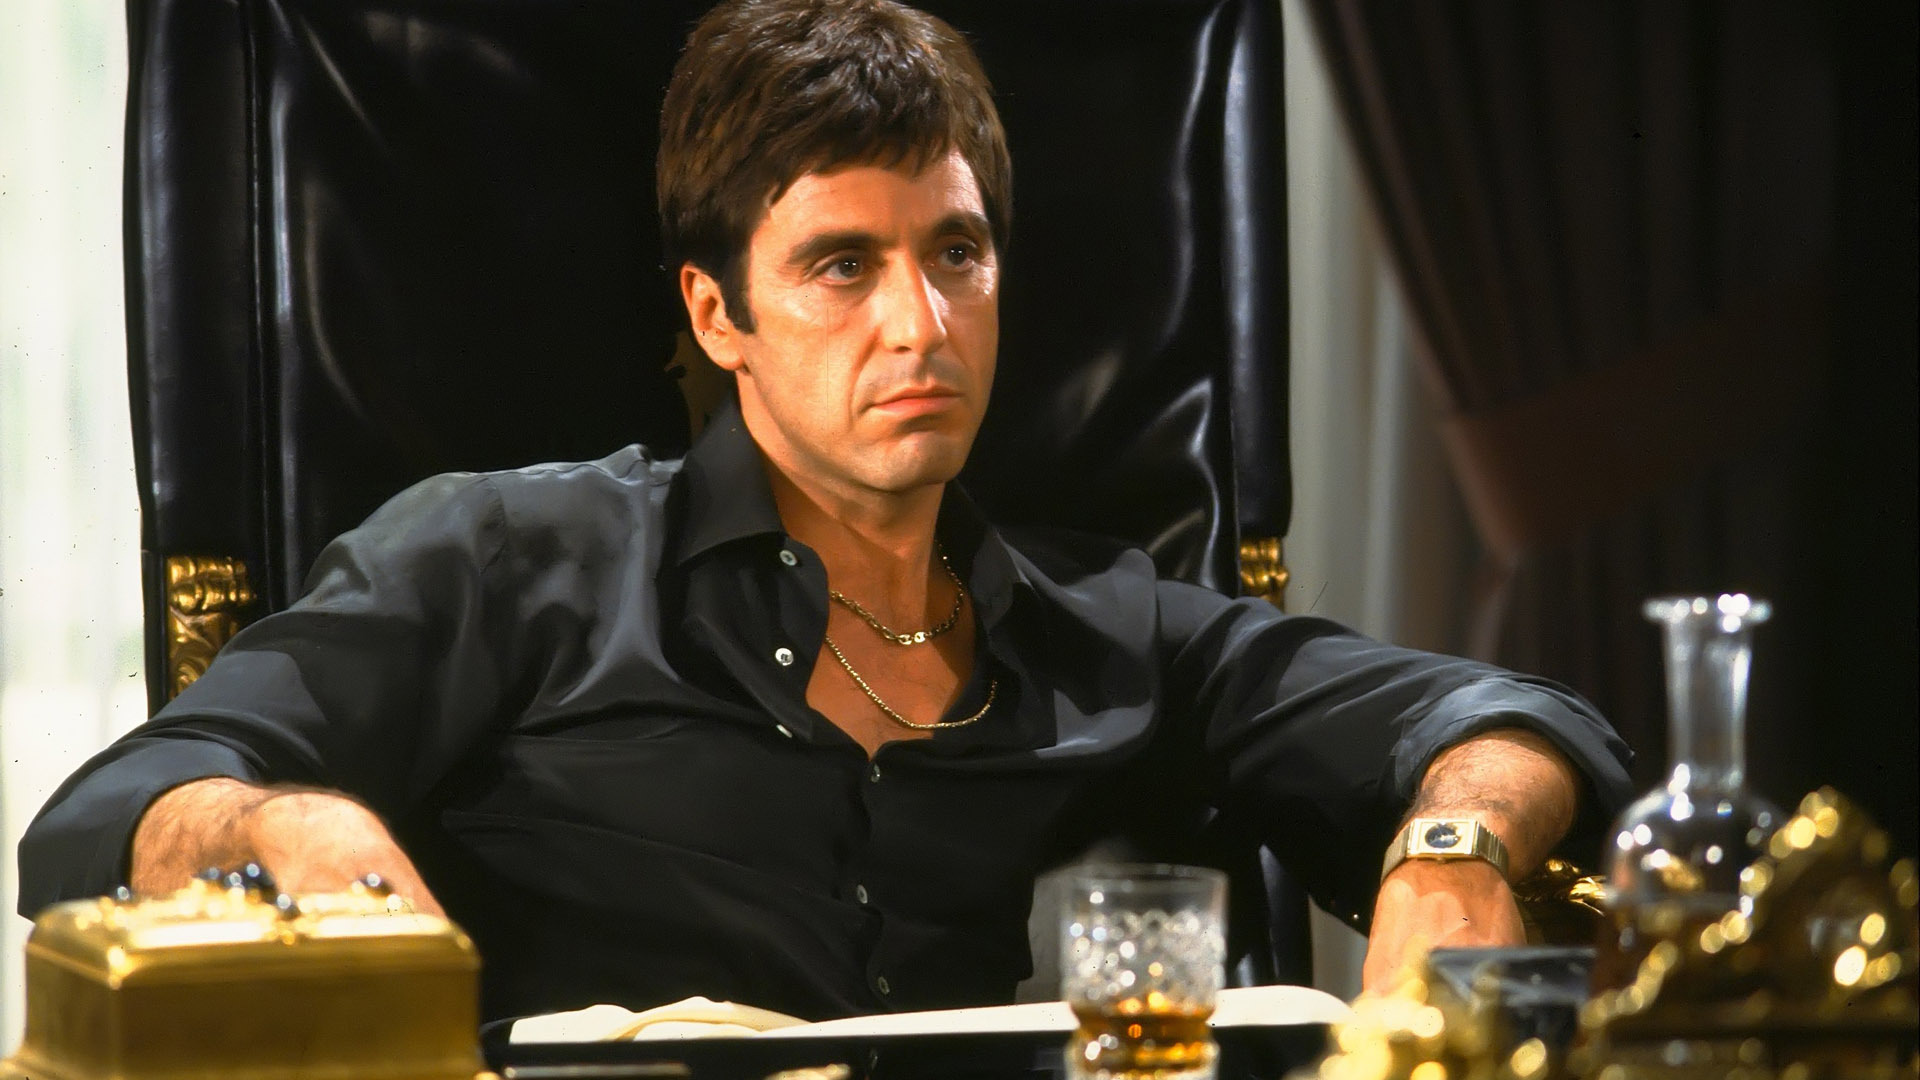 watches worn by Al Pacino